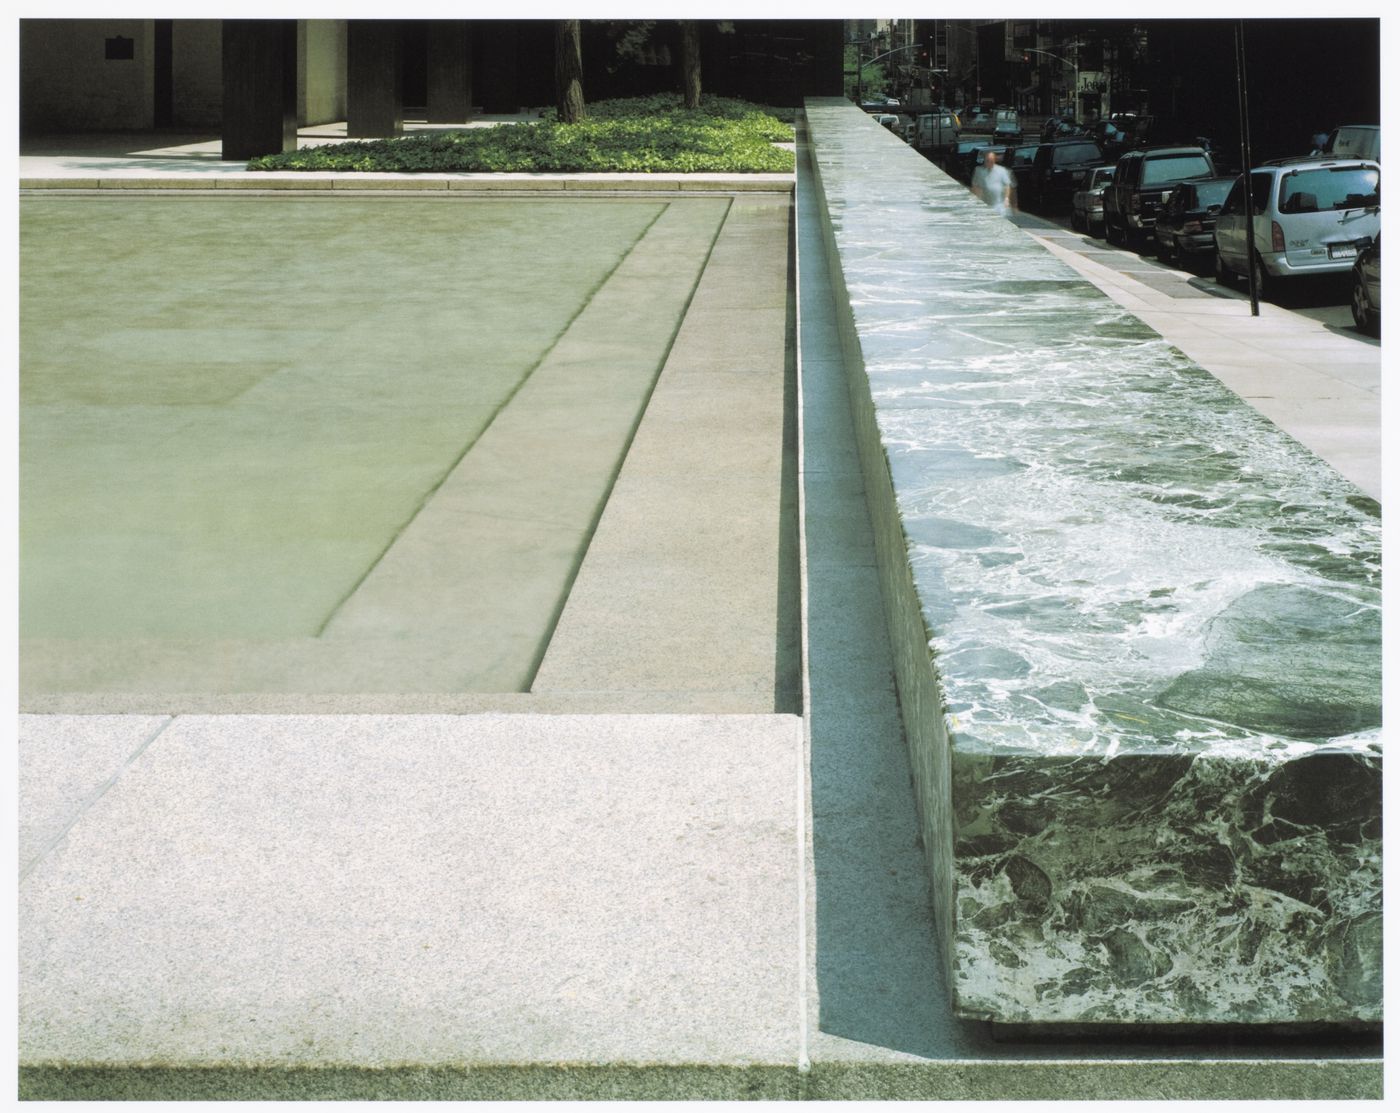 Seagram Building, New York: the plaza, verd-antique marble bench, and pool